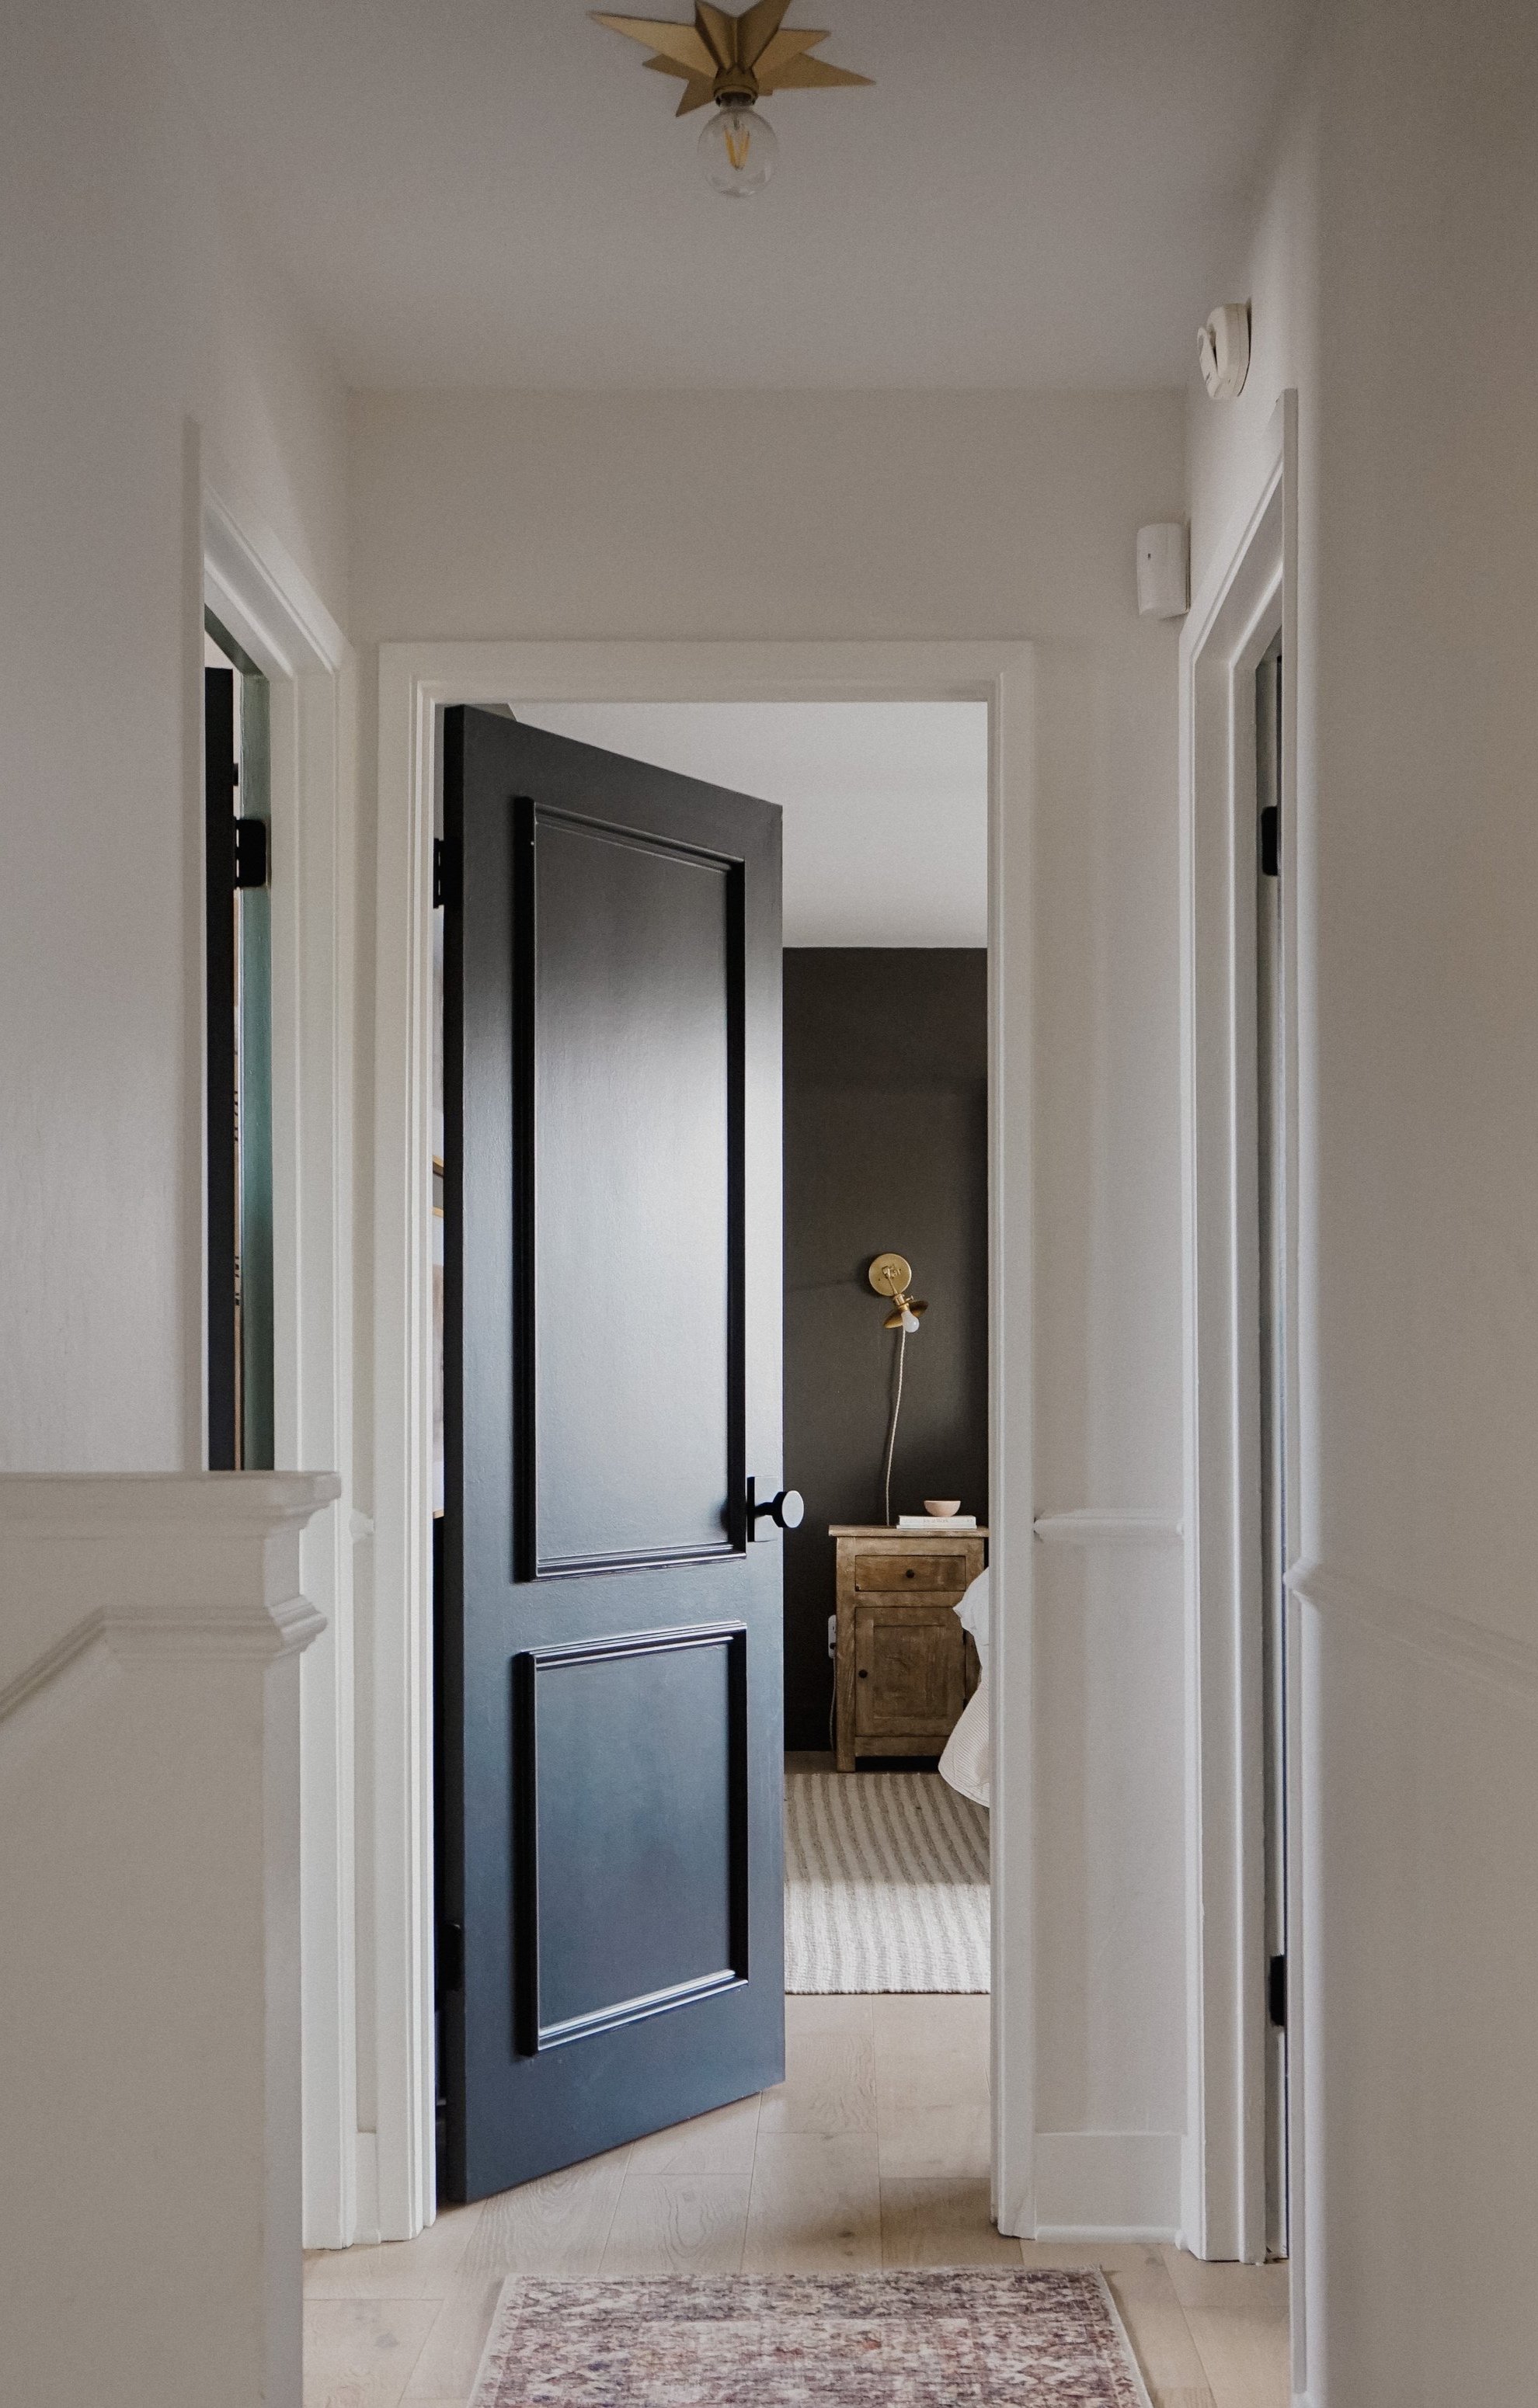 Ready for a Quick Home Update? Change Your Doorknobs!